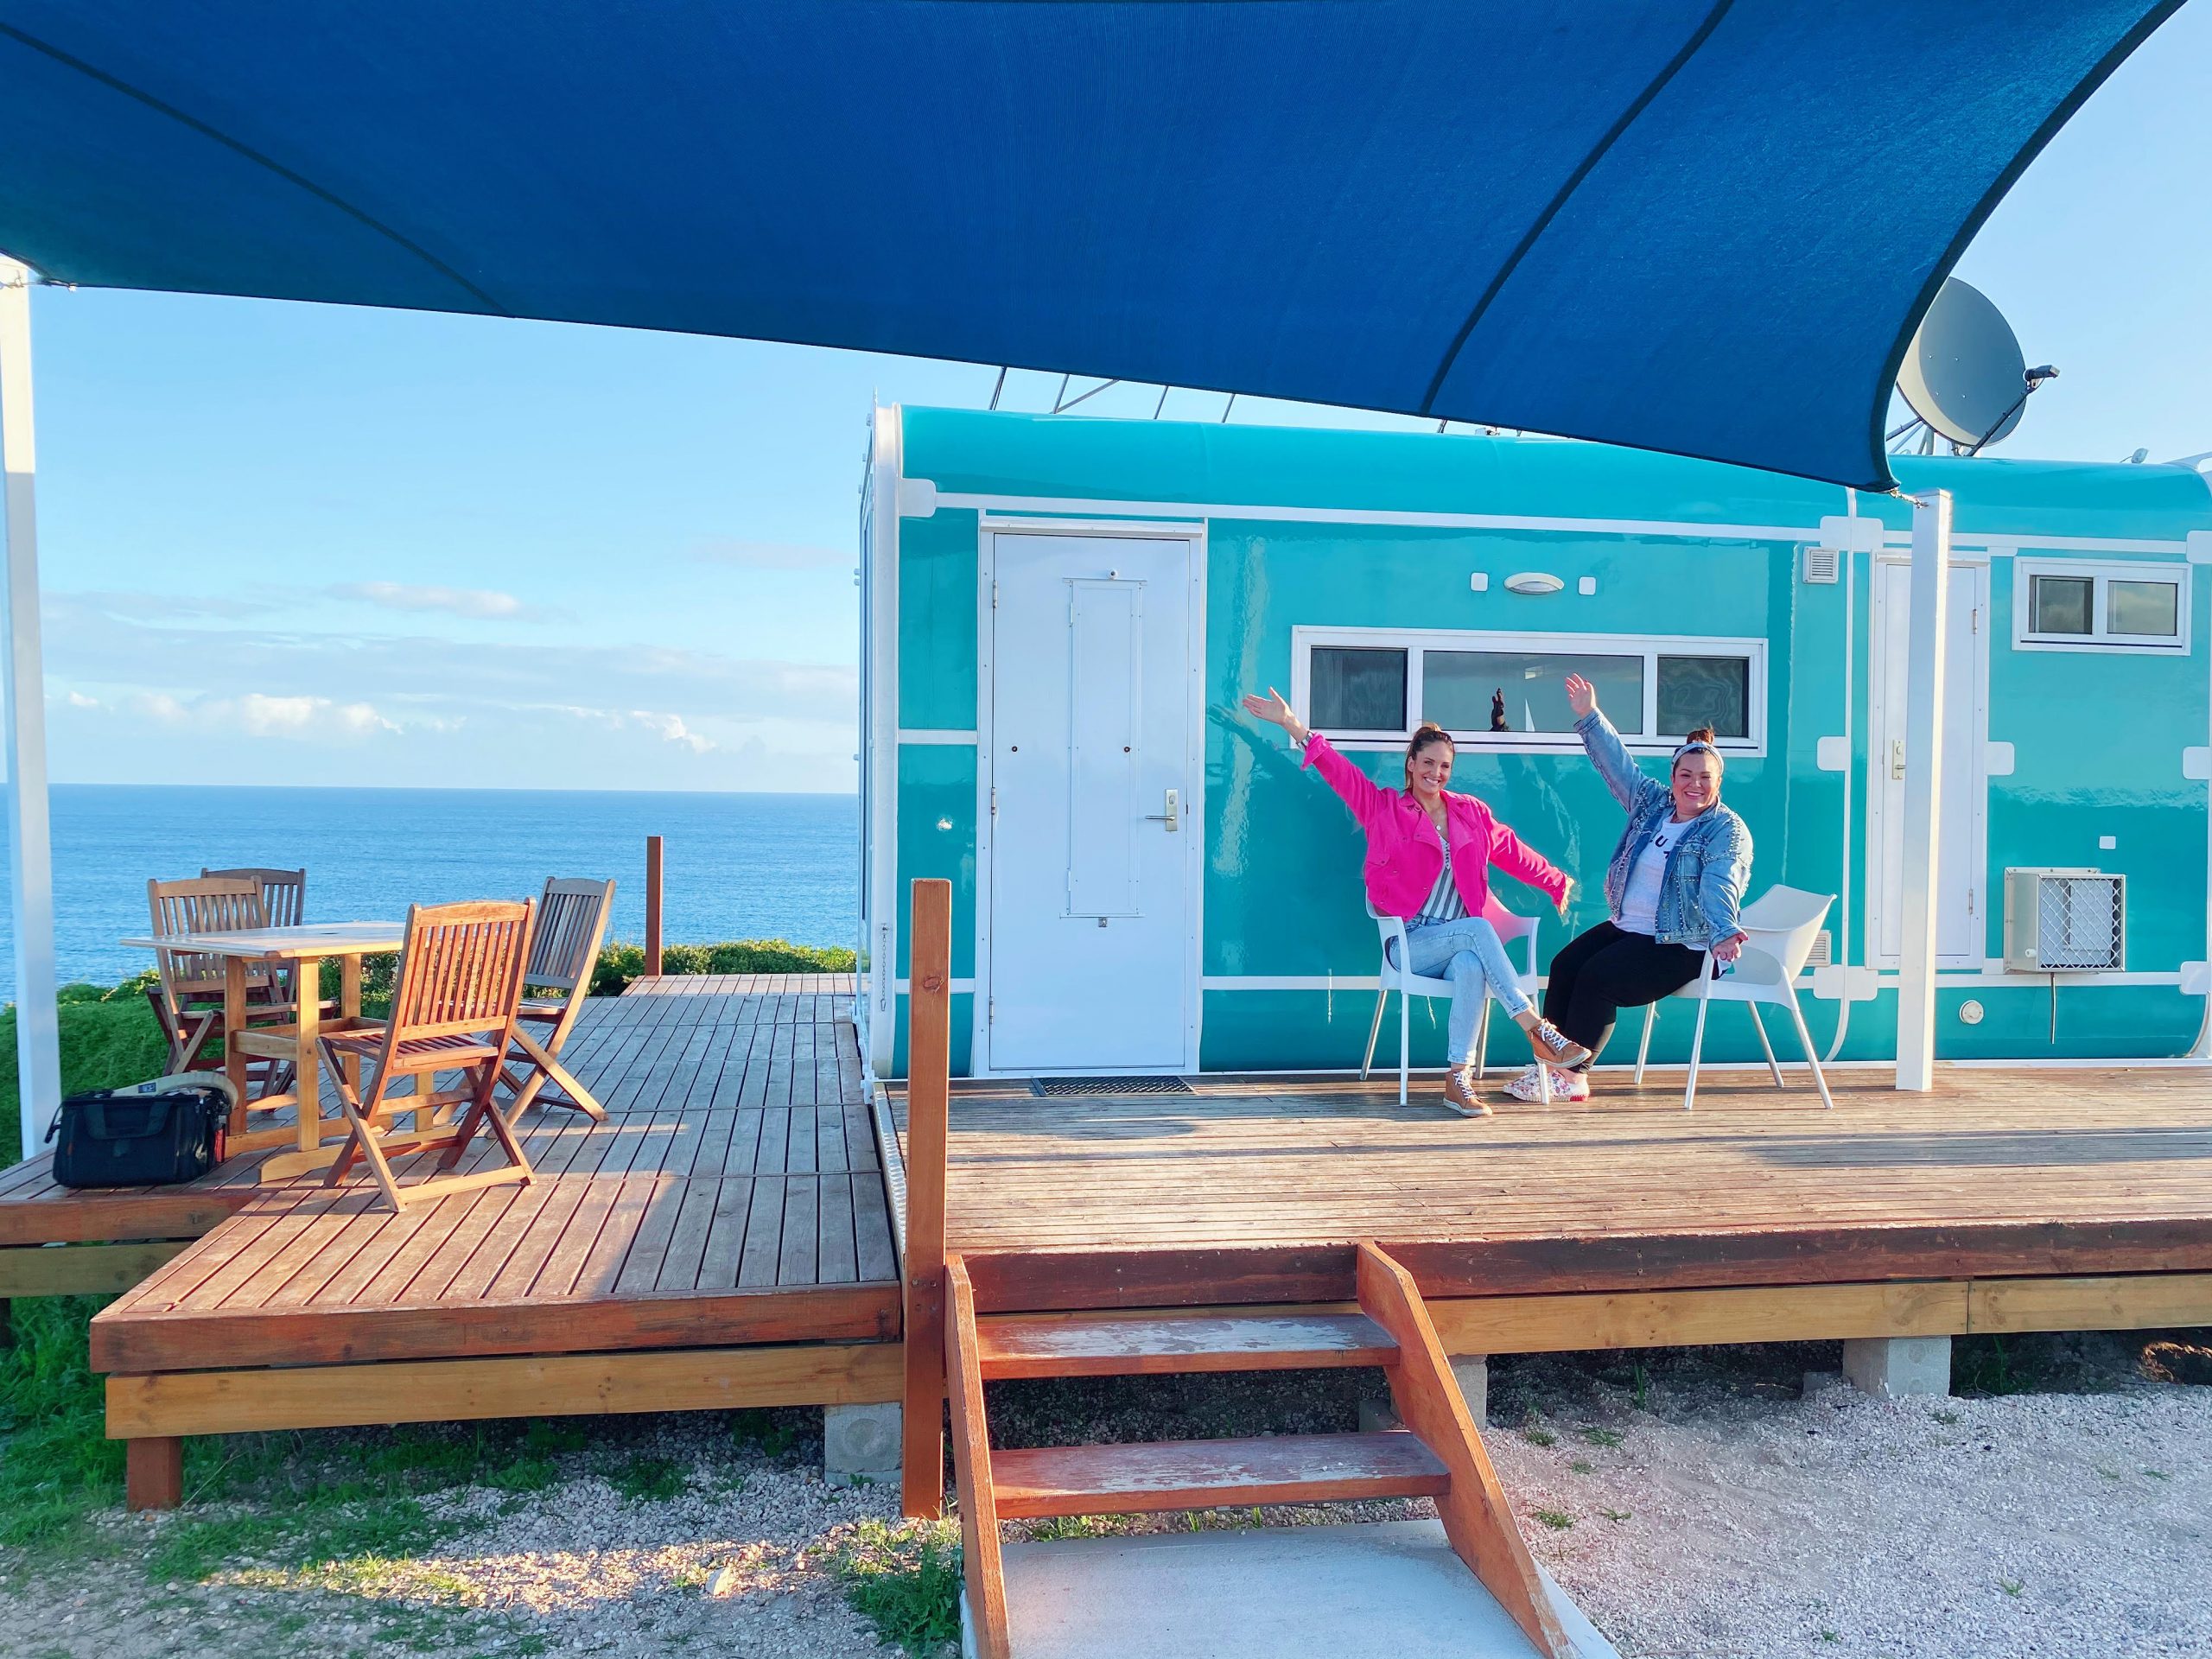 Ocean Pods – the most unique accommodation on Yorke Peninsula